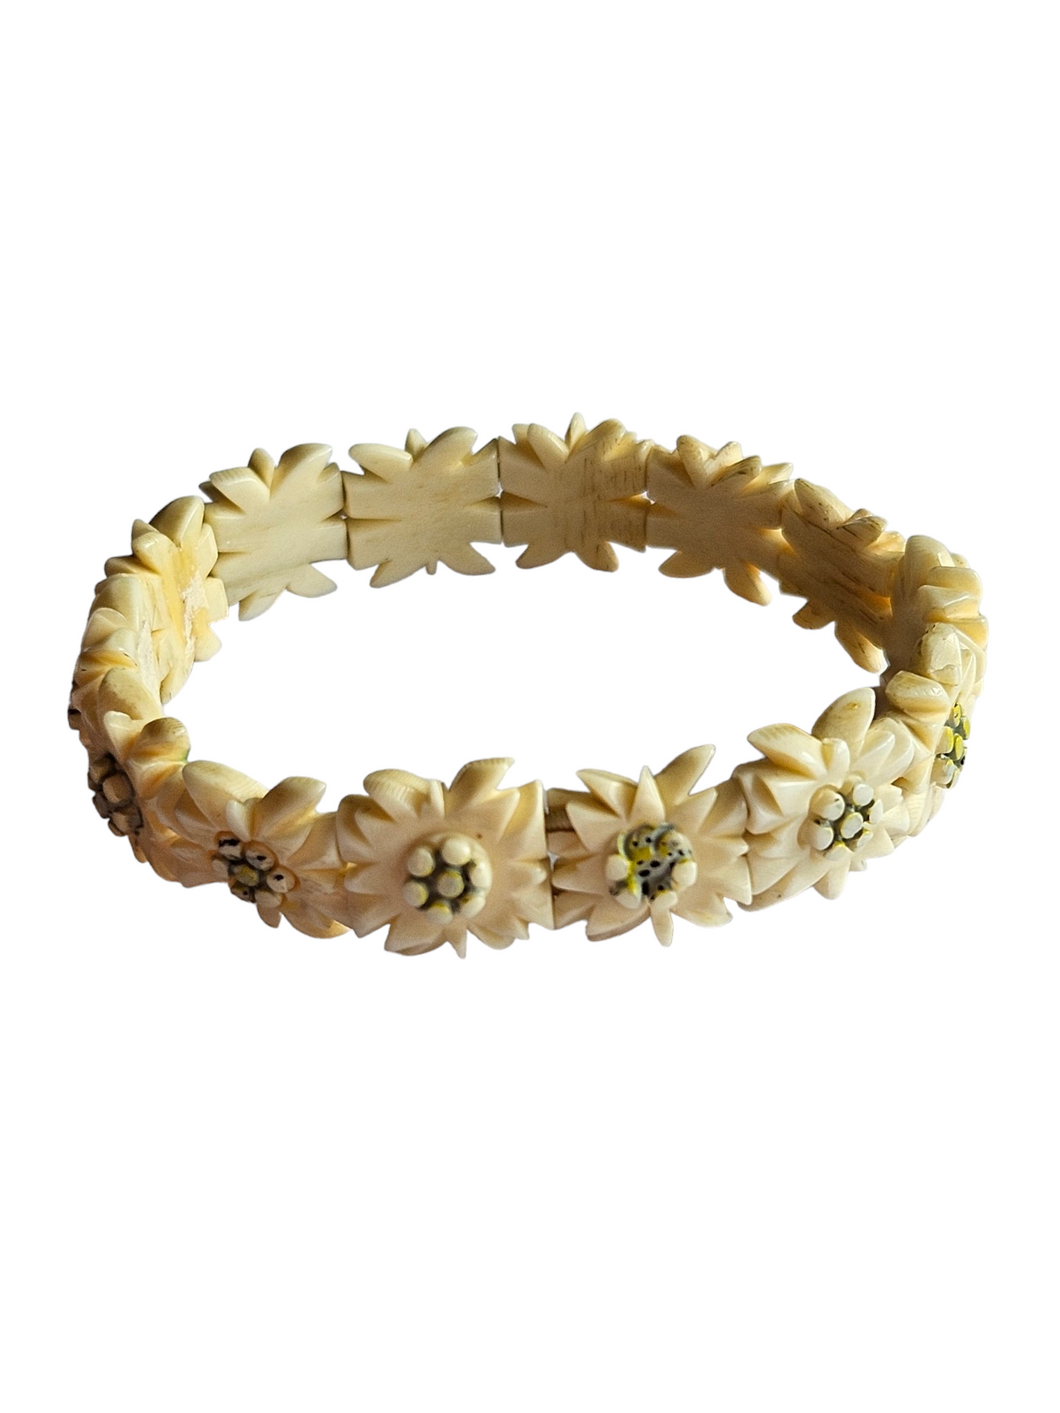 1940s Carved Edelweiss Stretchy Bracelet